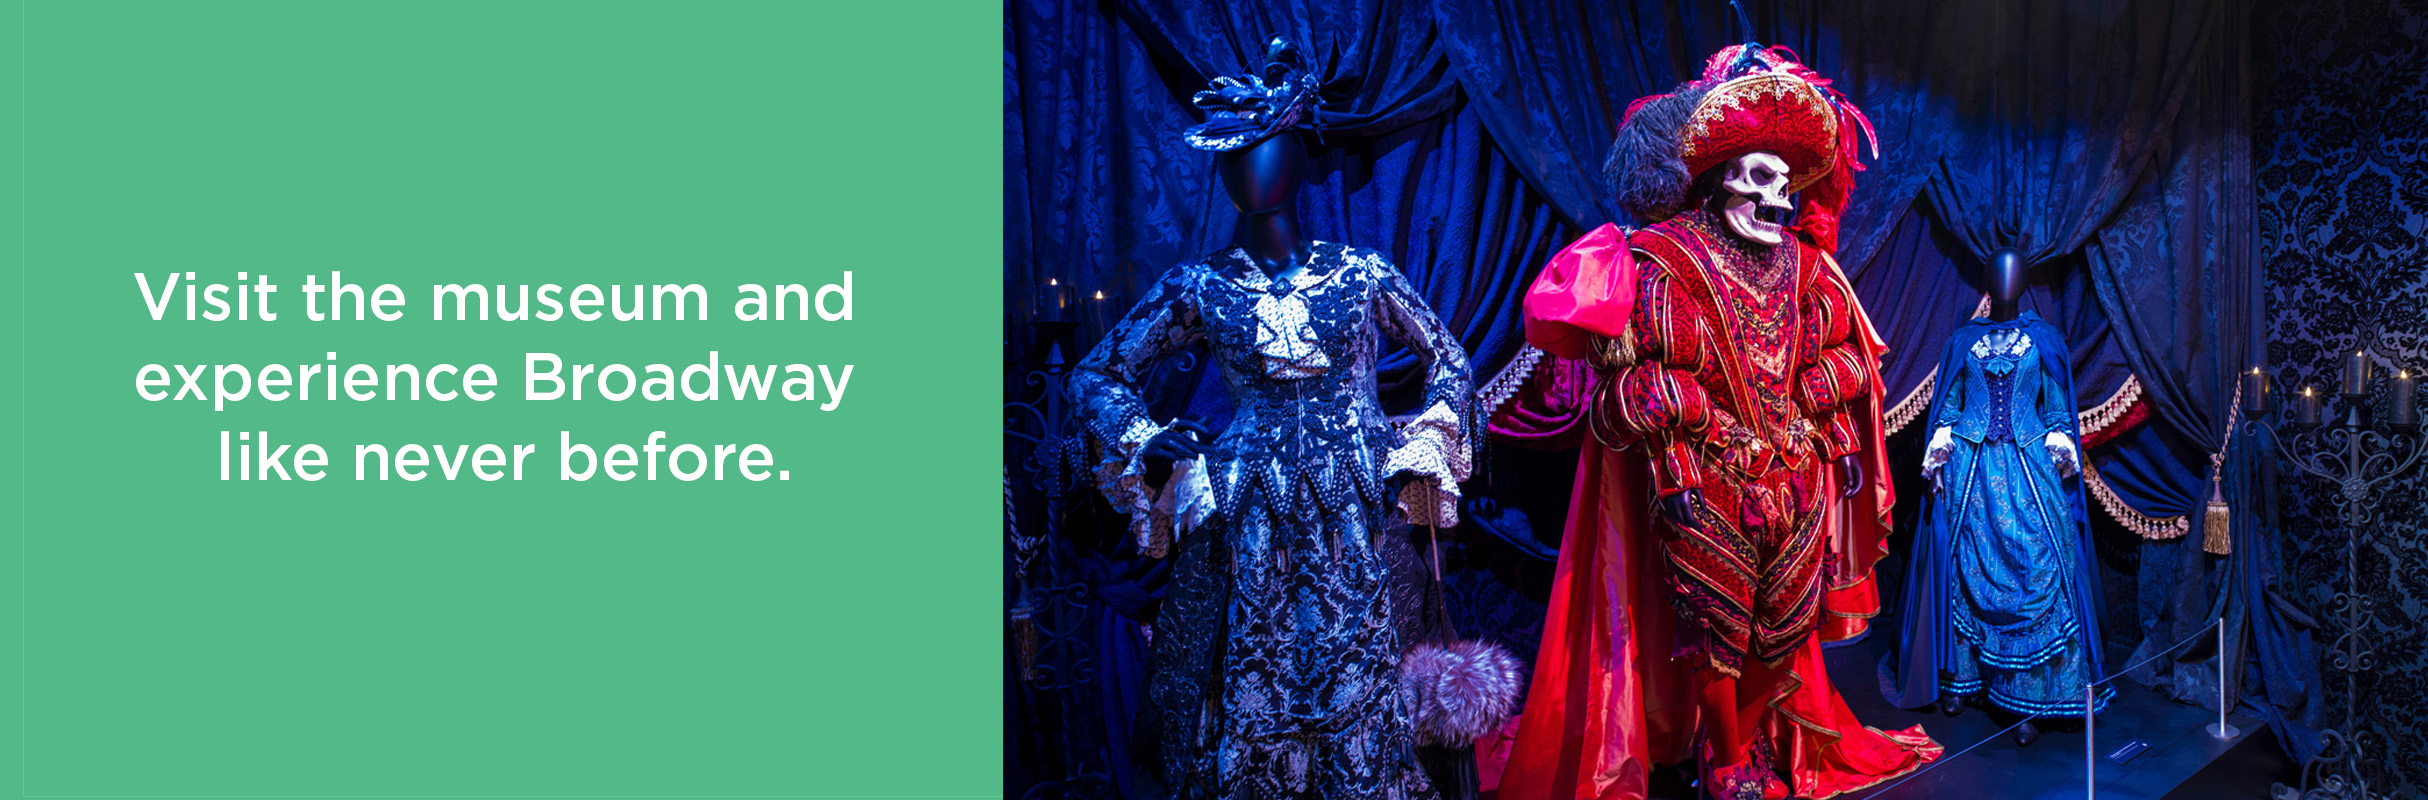 Visit the museum and experience Broadway like never before with image of costumes on display.